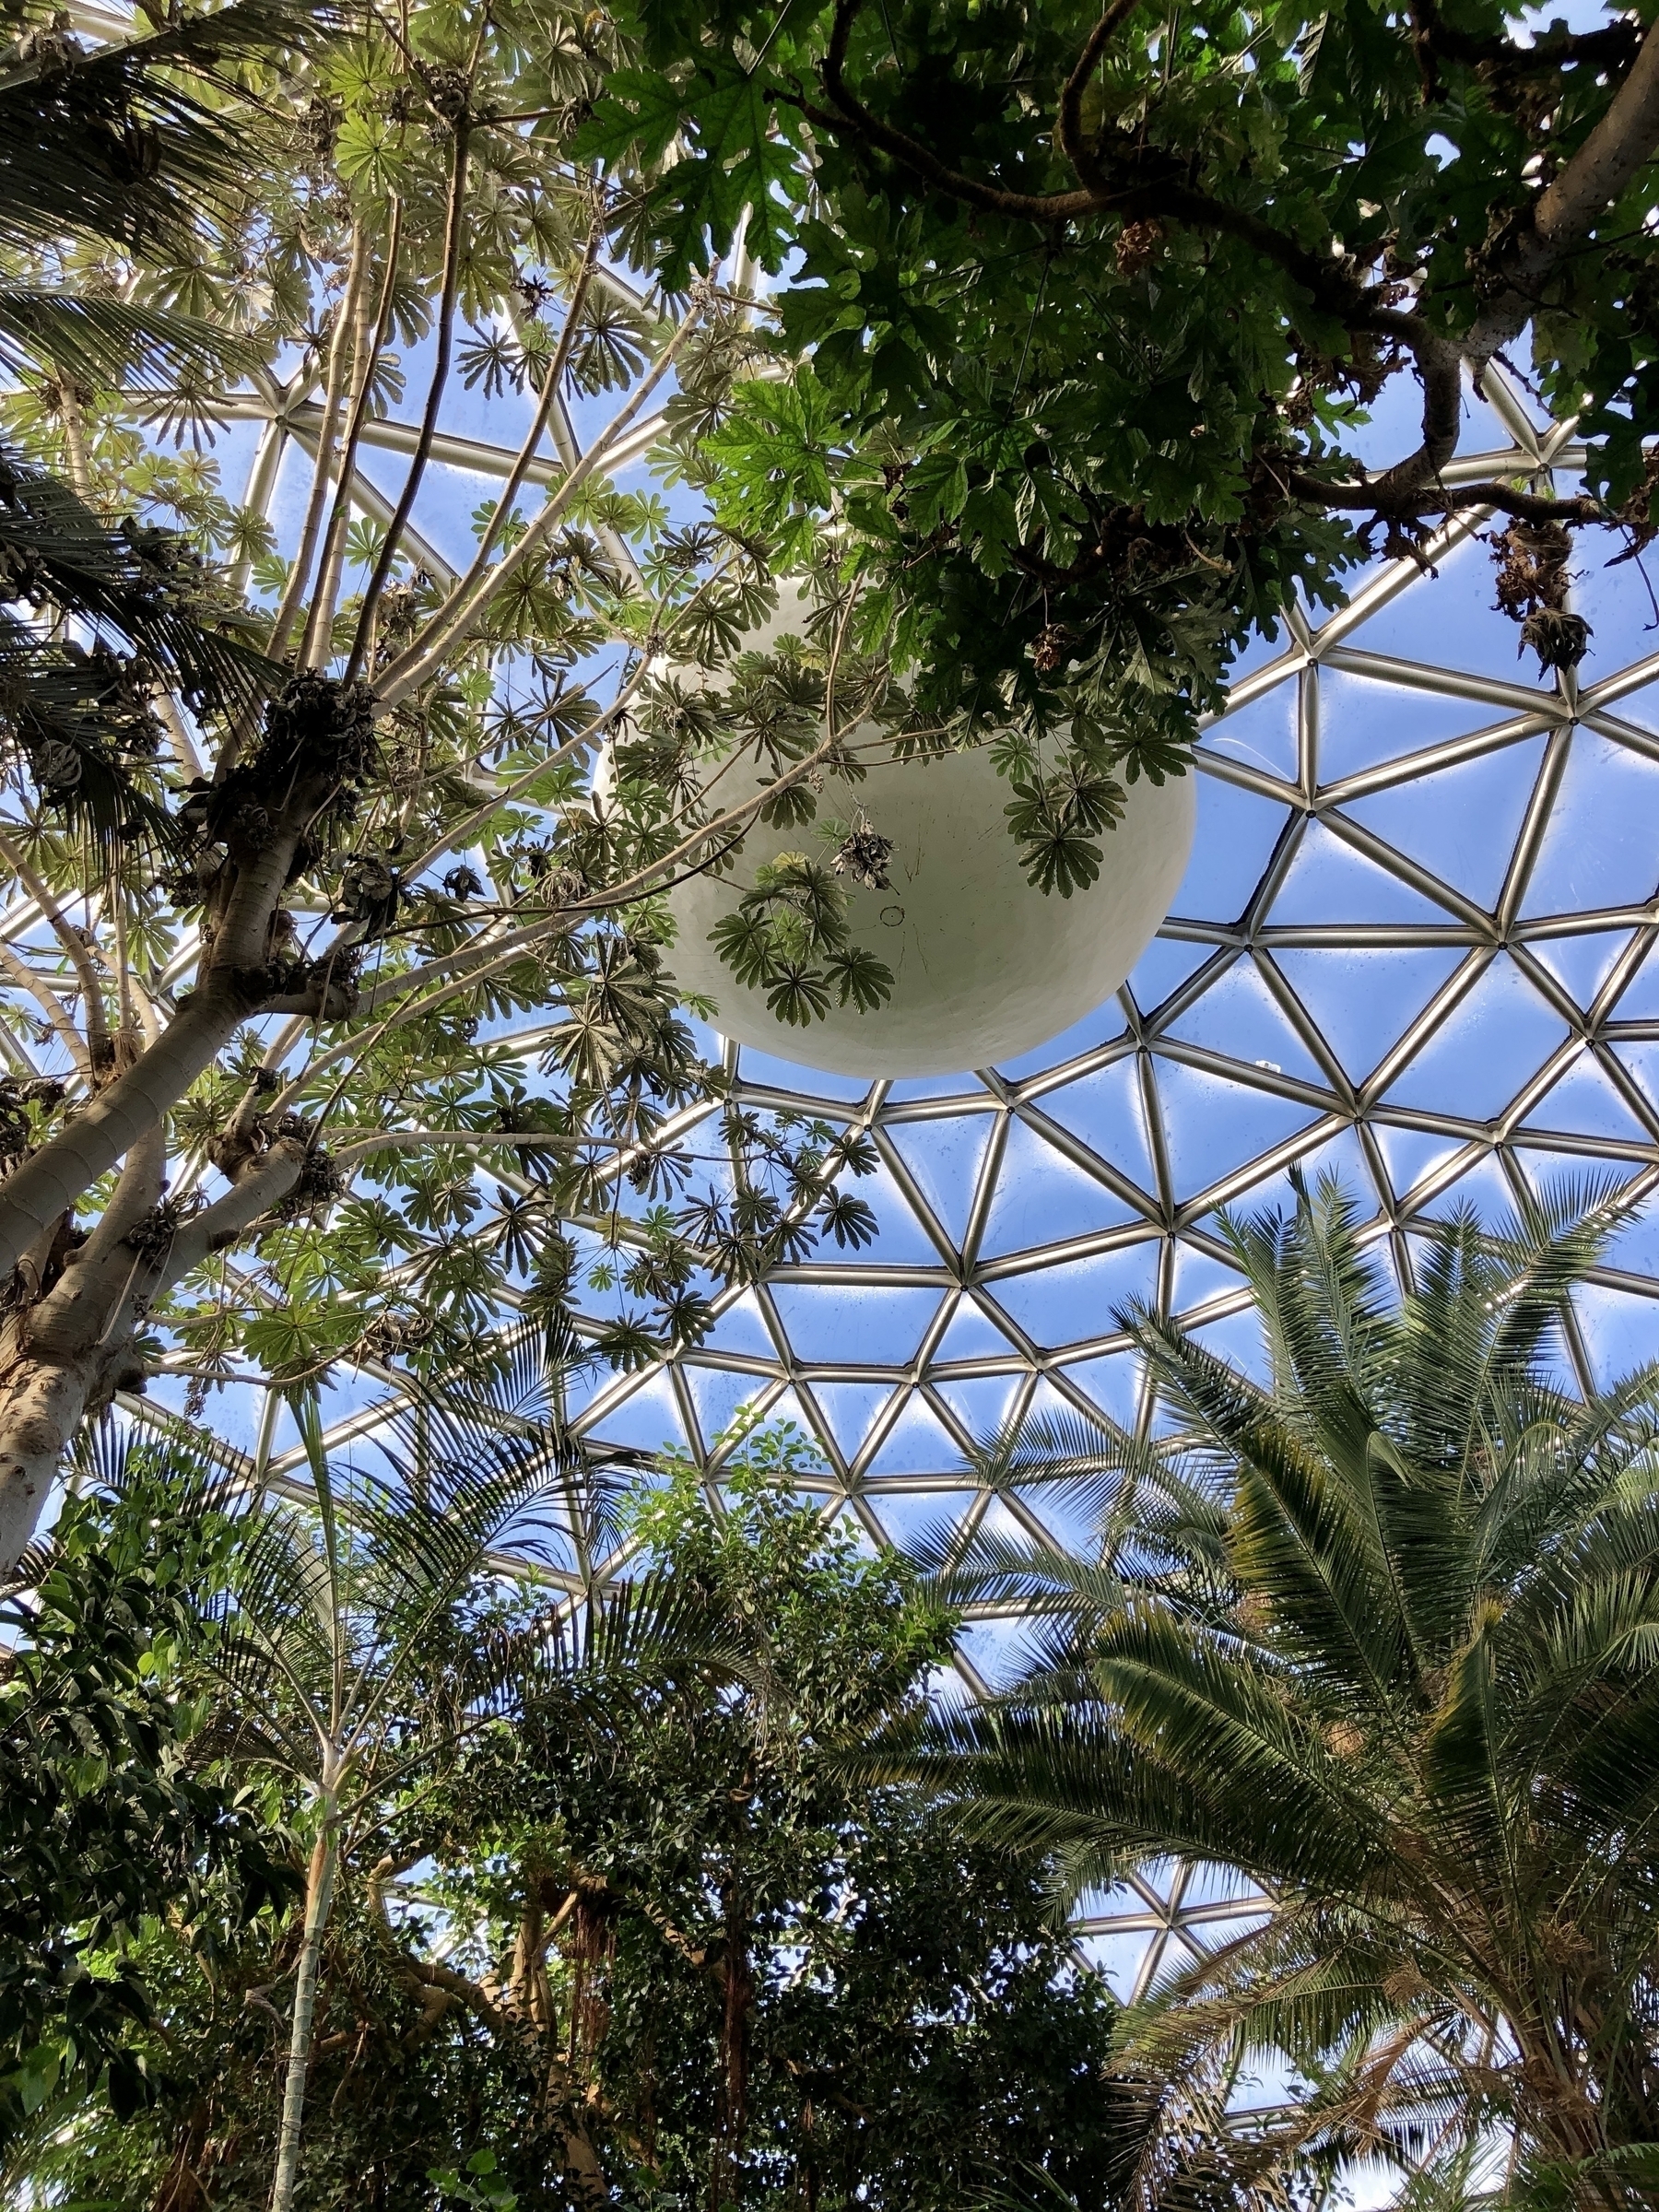 View of tropical trees and palms looking up to the top of the Bloedel Conservatory dome